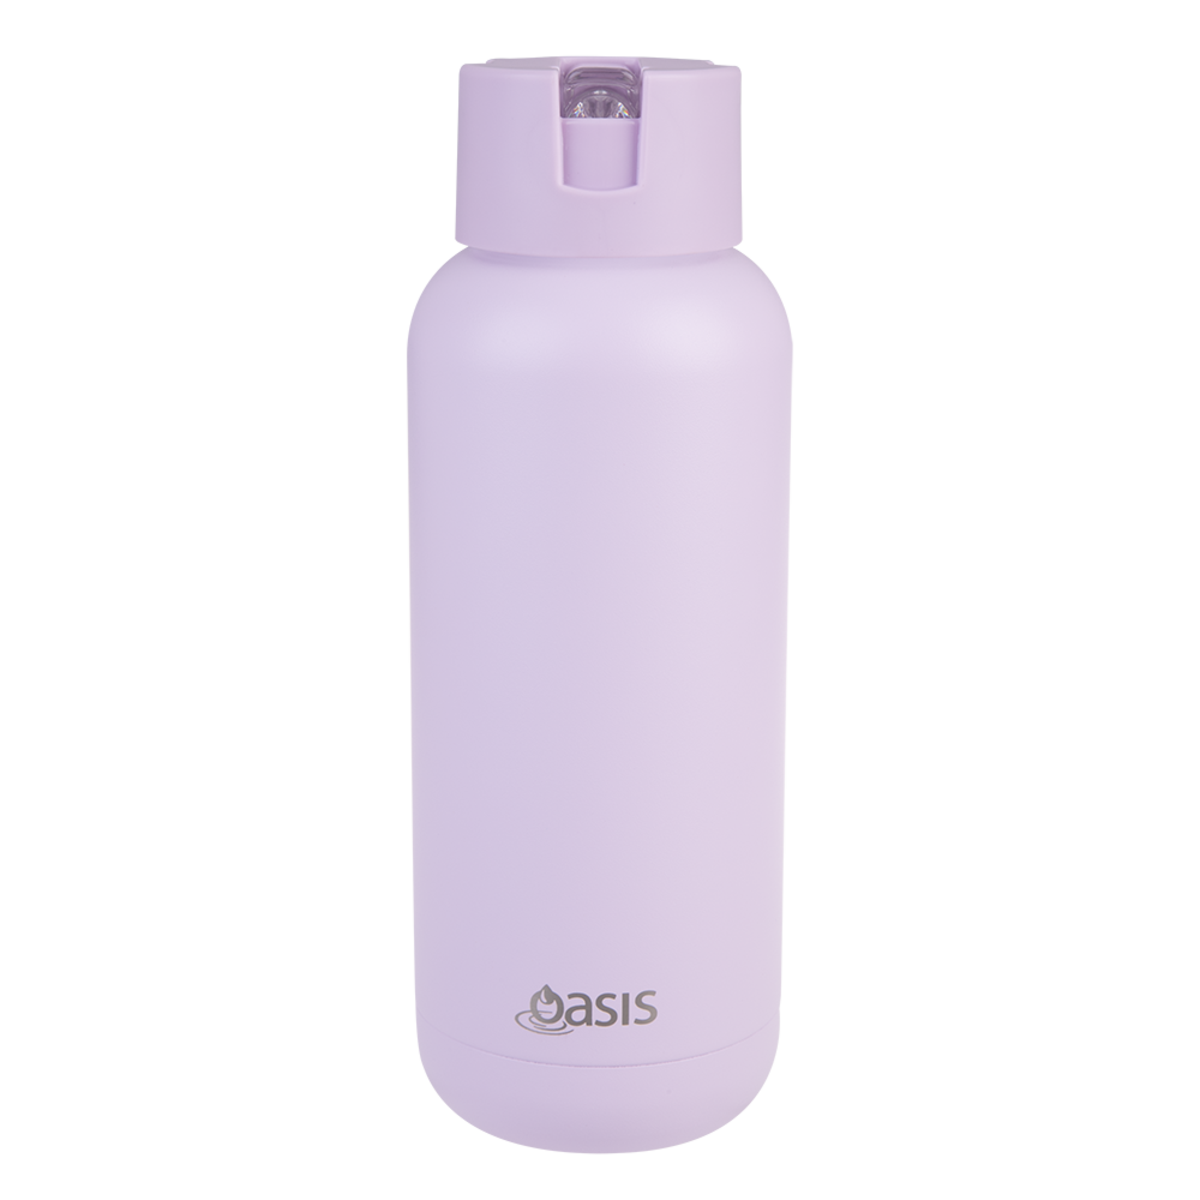 Oasis "moda" Ceramic Lined S/s Triple Wall Insulated Drink Bottle 1l - Orchid